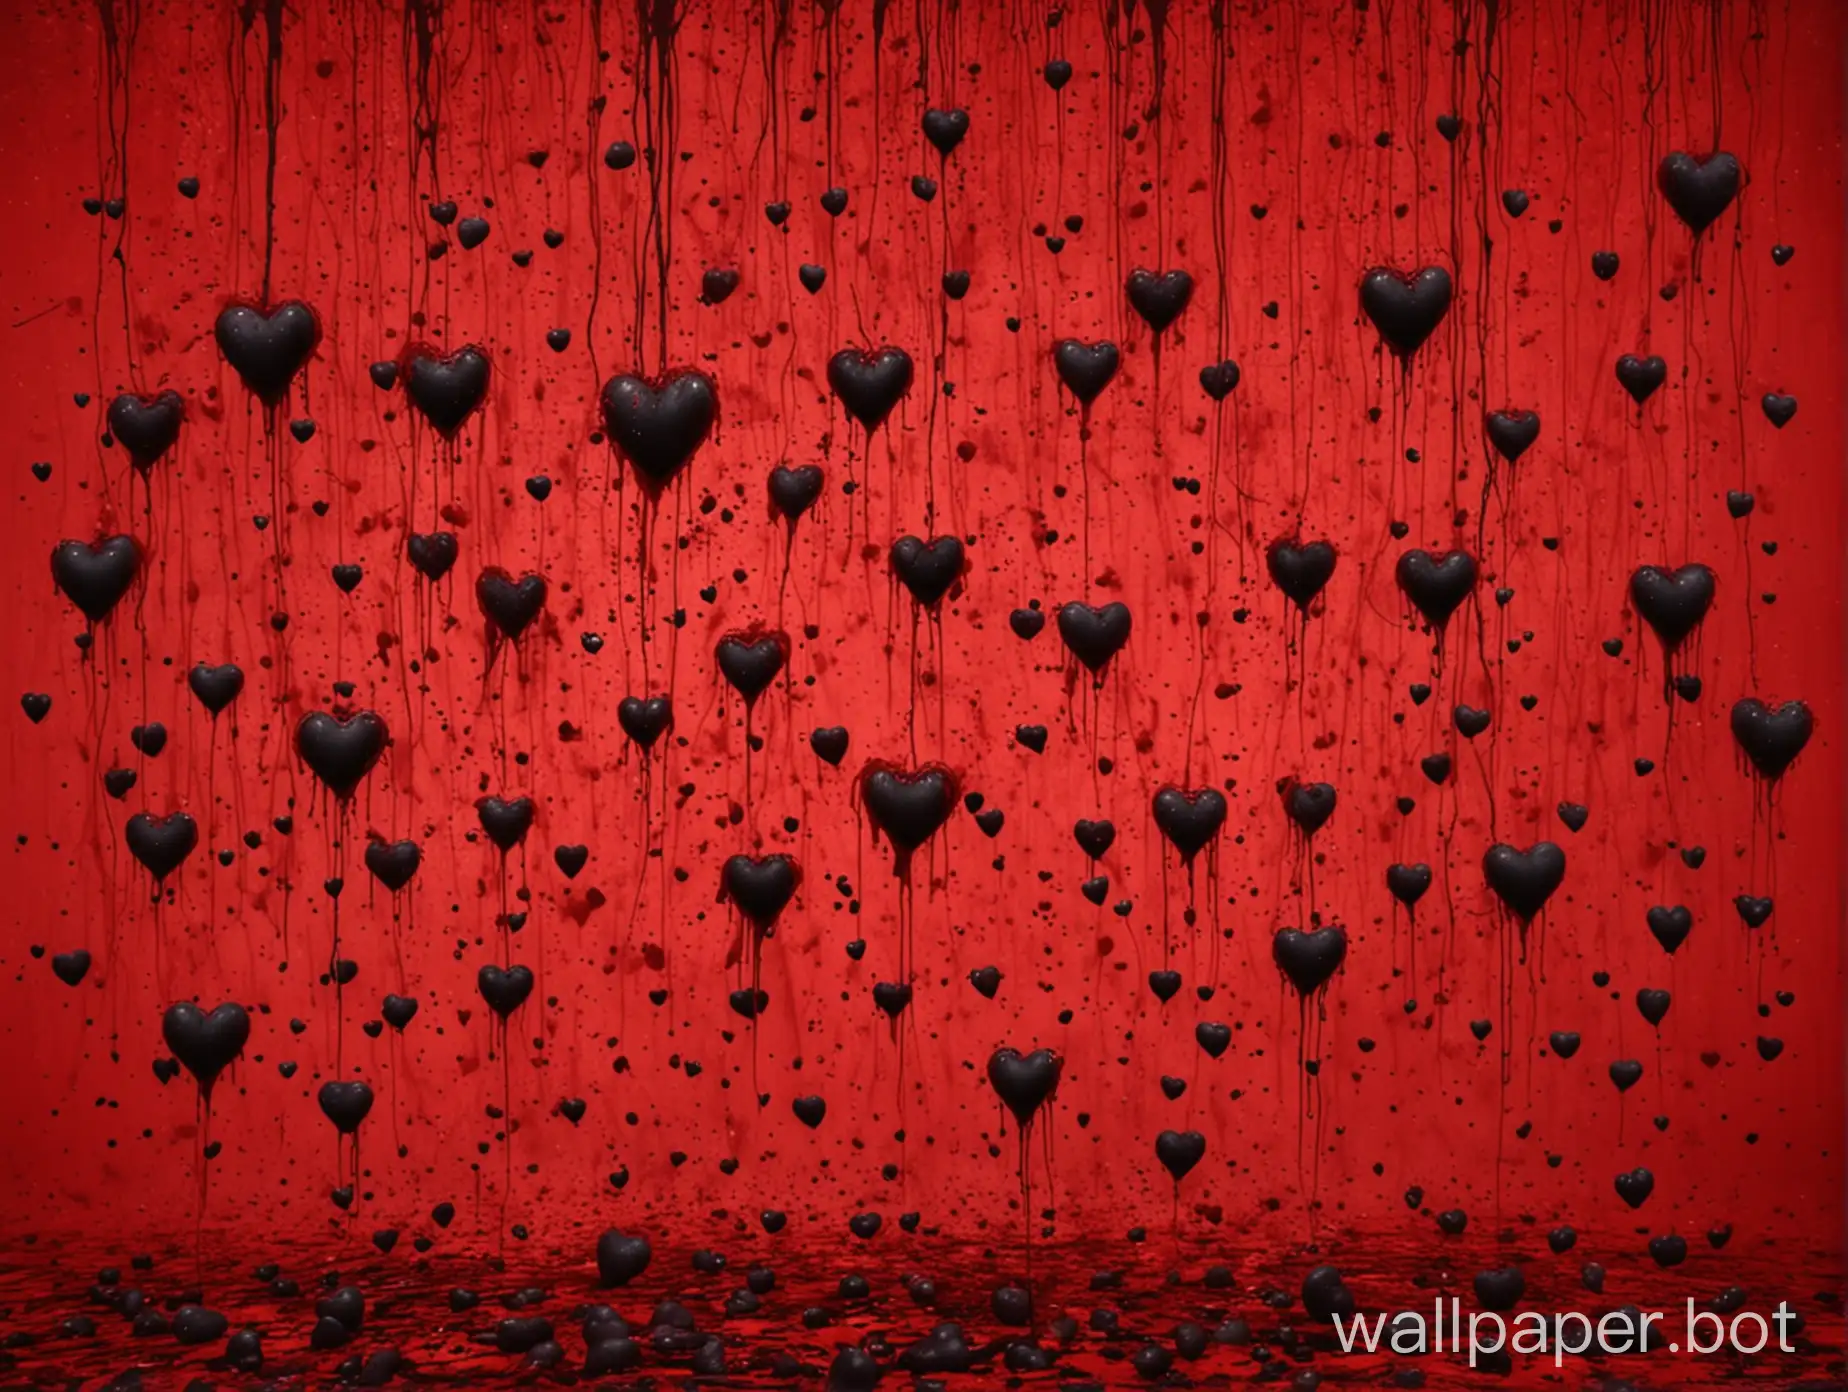 Bloody-Red-Background-with-Floating-Black-Hearts